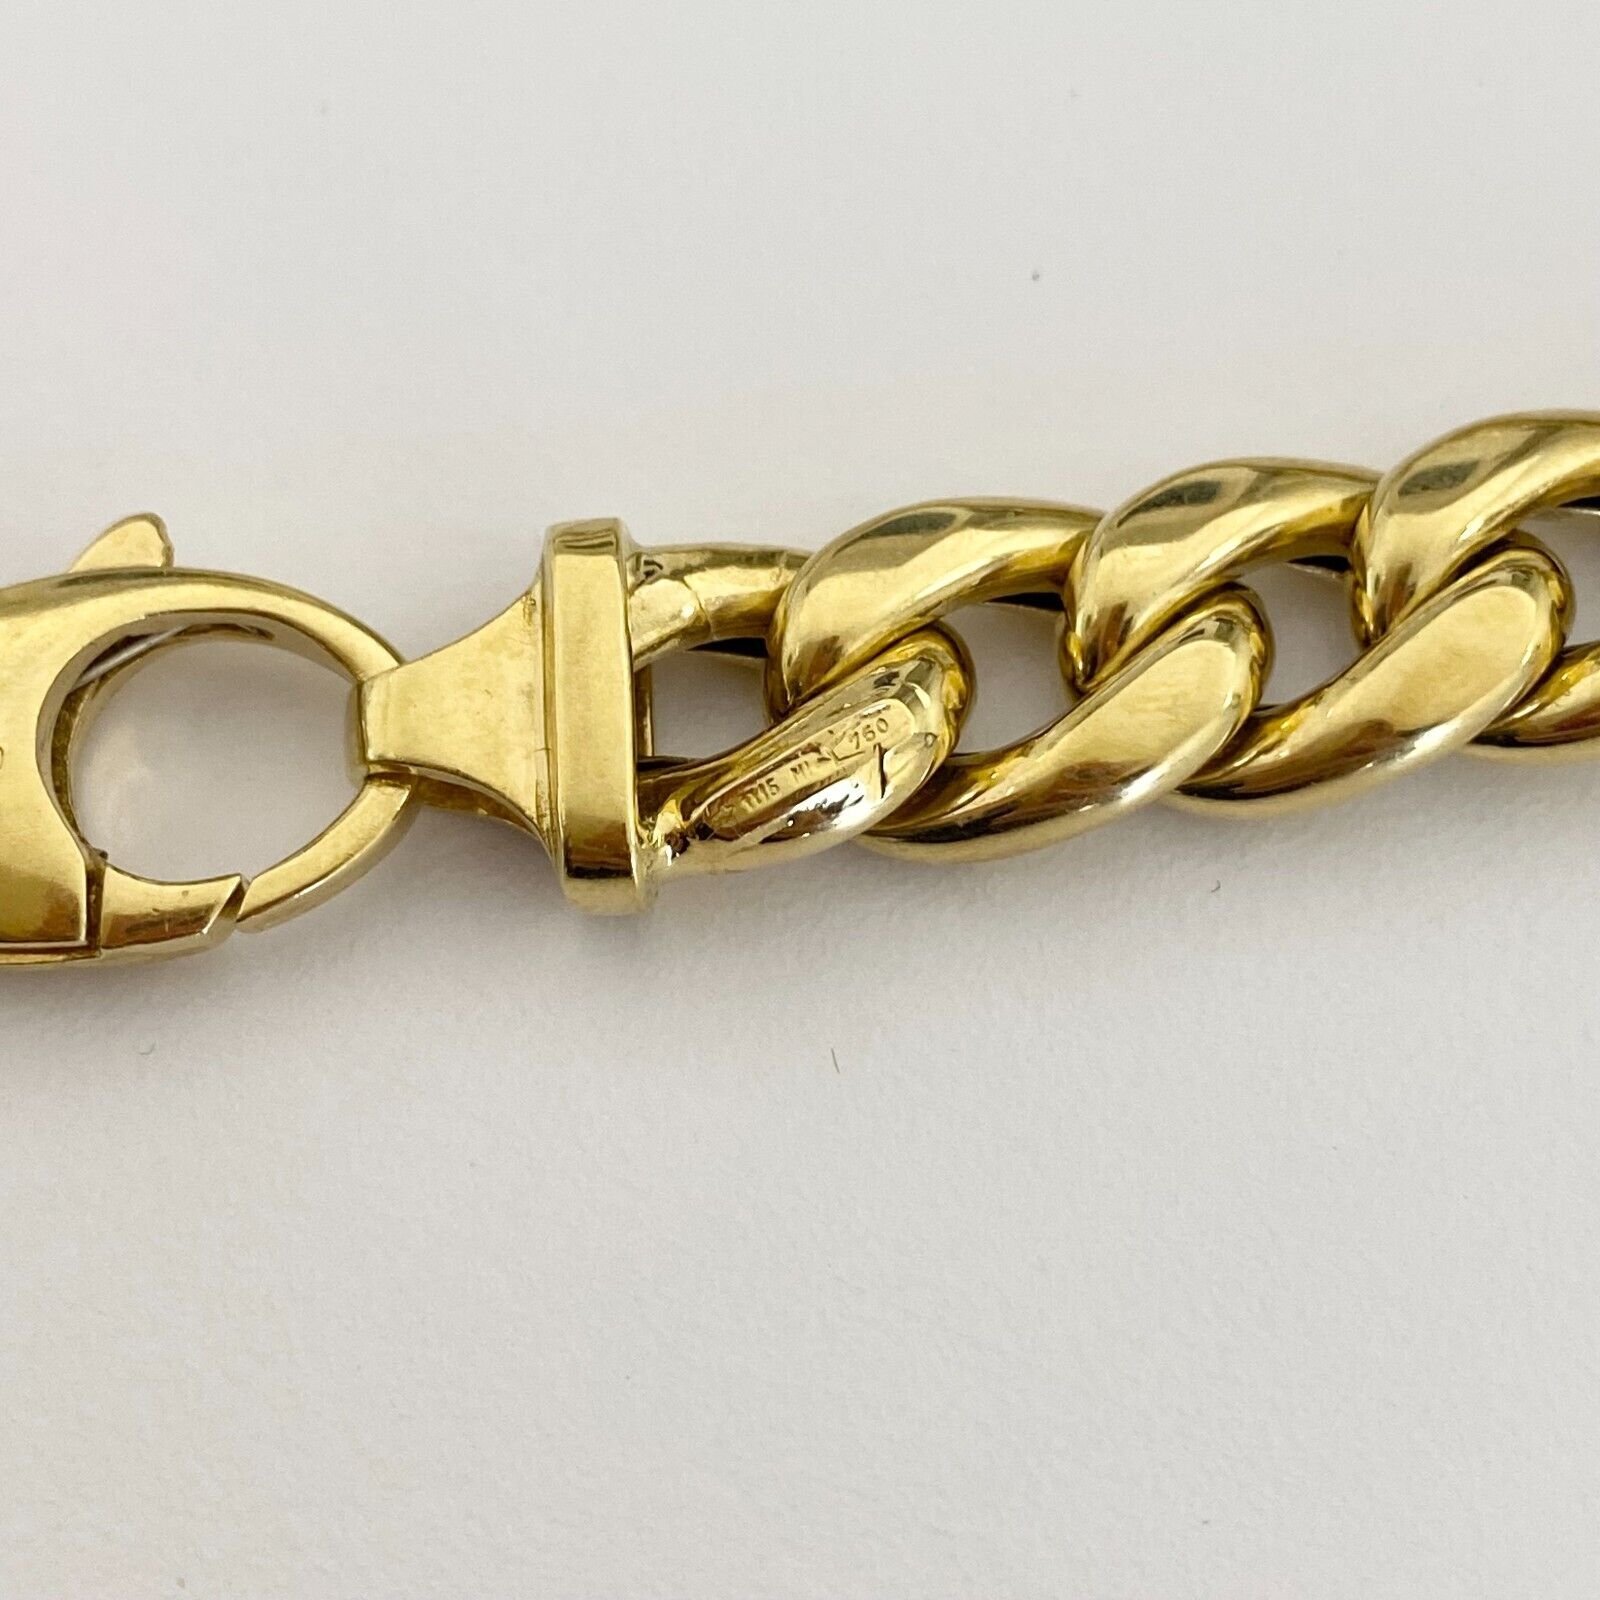 Thick Hollow Cuban Link Chain Necklace in 18k Yellow  Gold